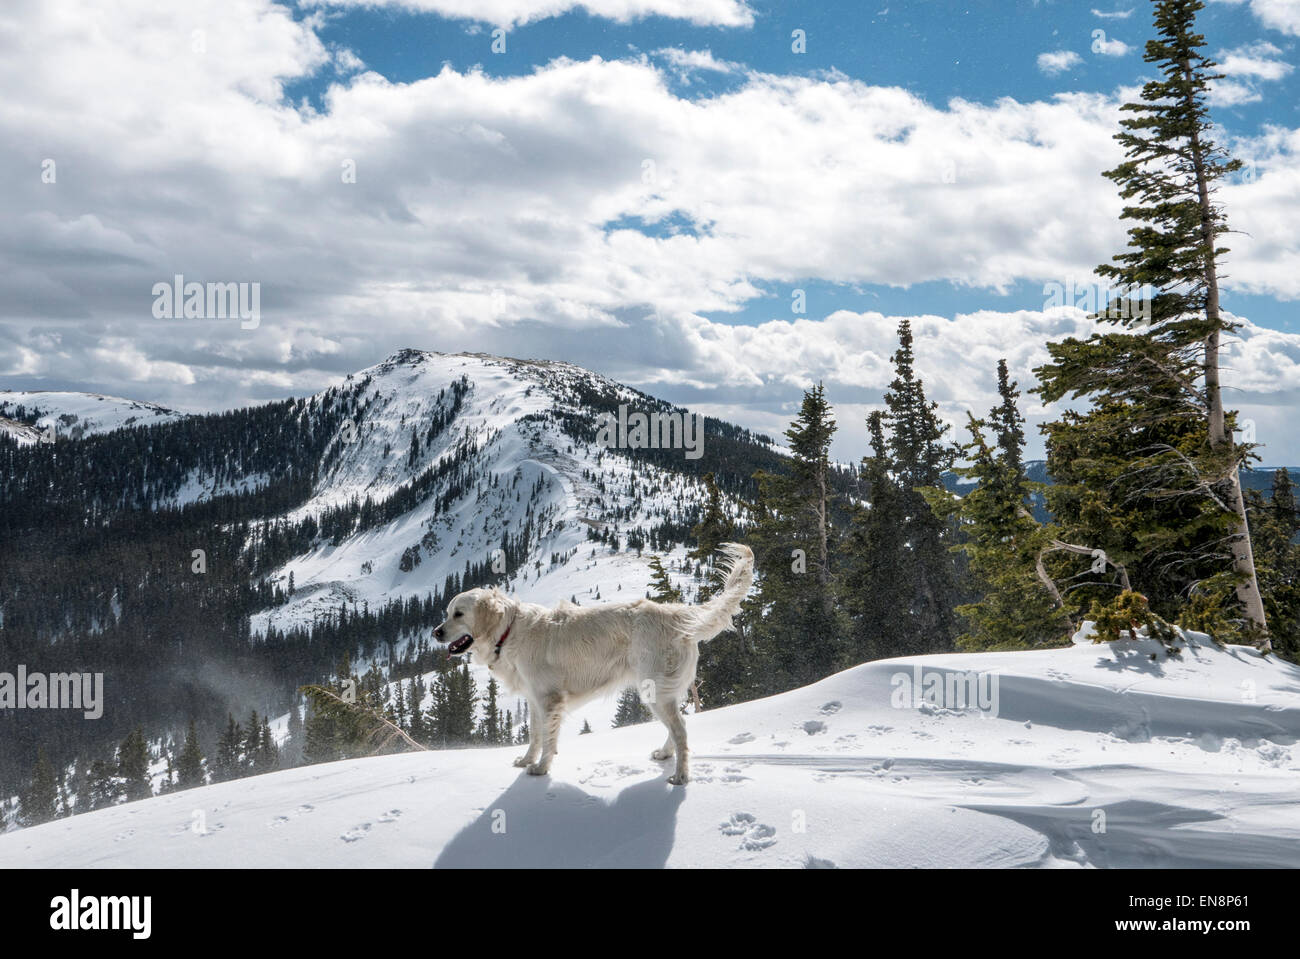 Platinum colored Golden Retriever dog playing in snow, Monarch Pass, Continental Divide, Colorado, USA Stock Photo